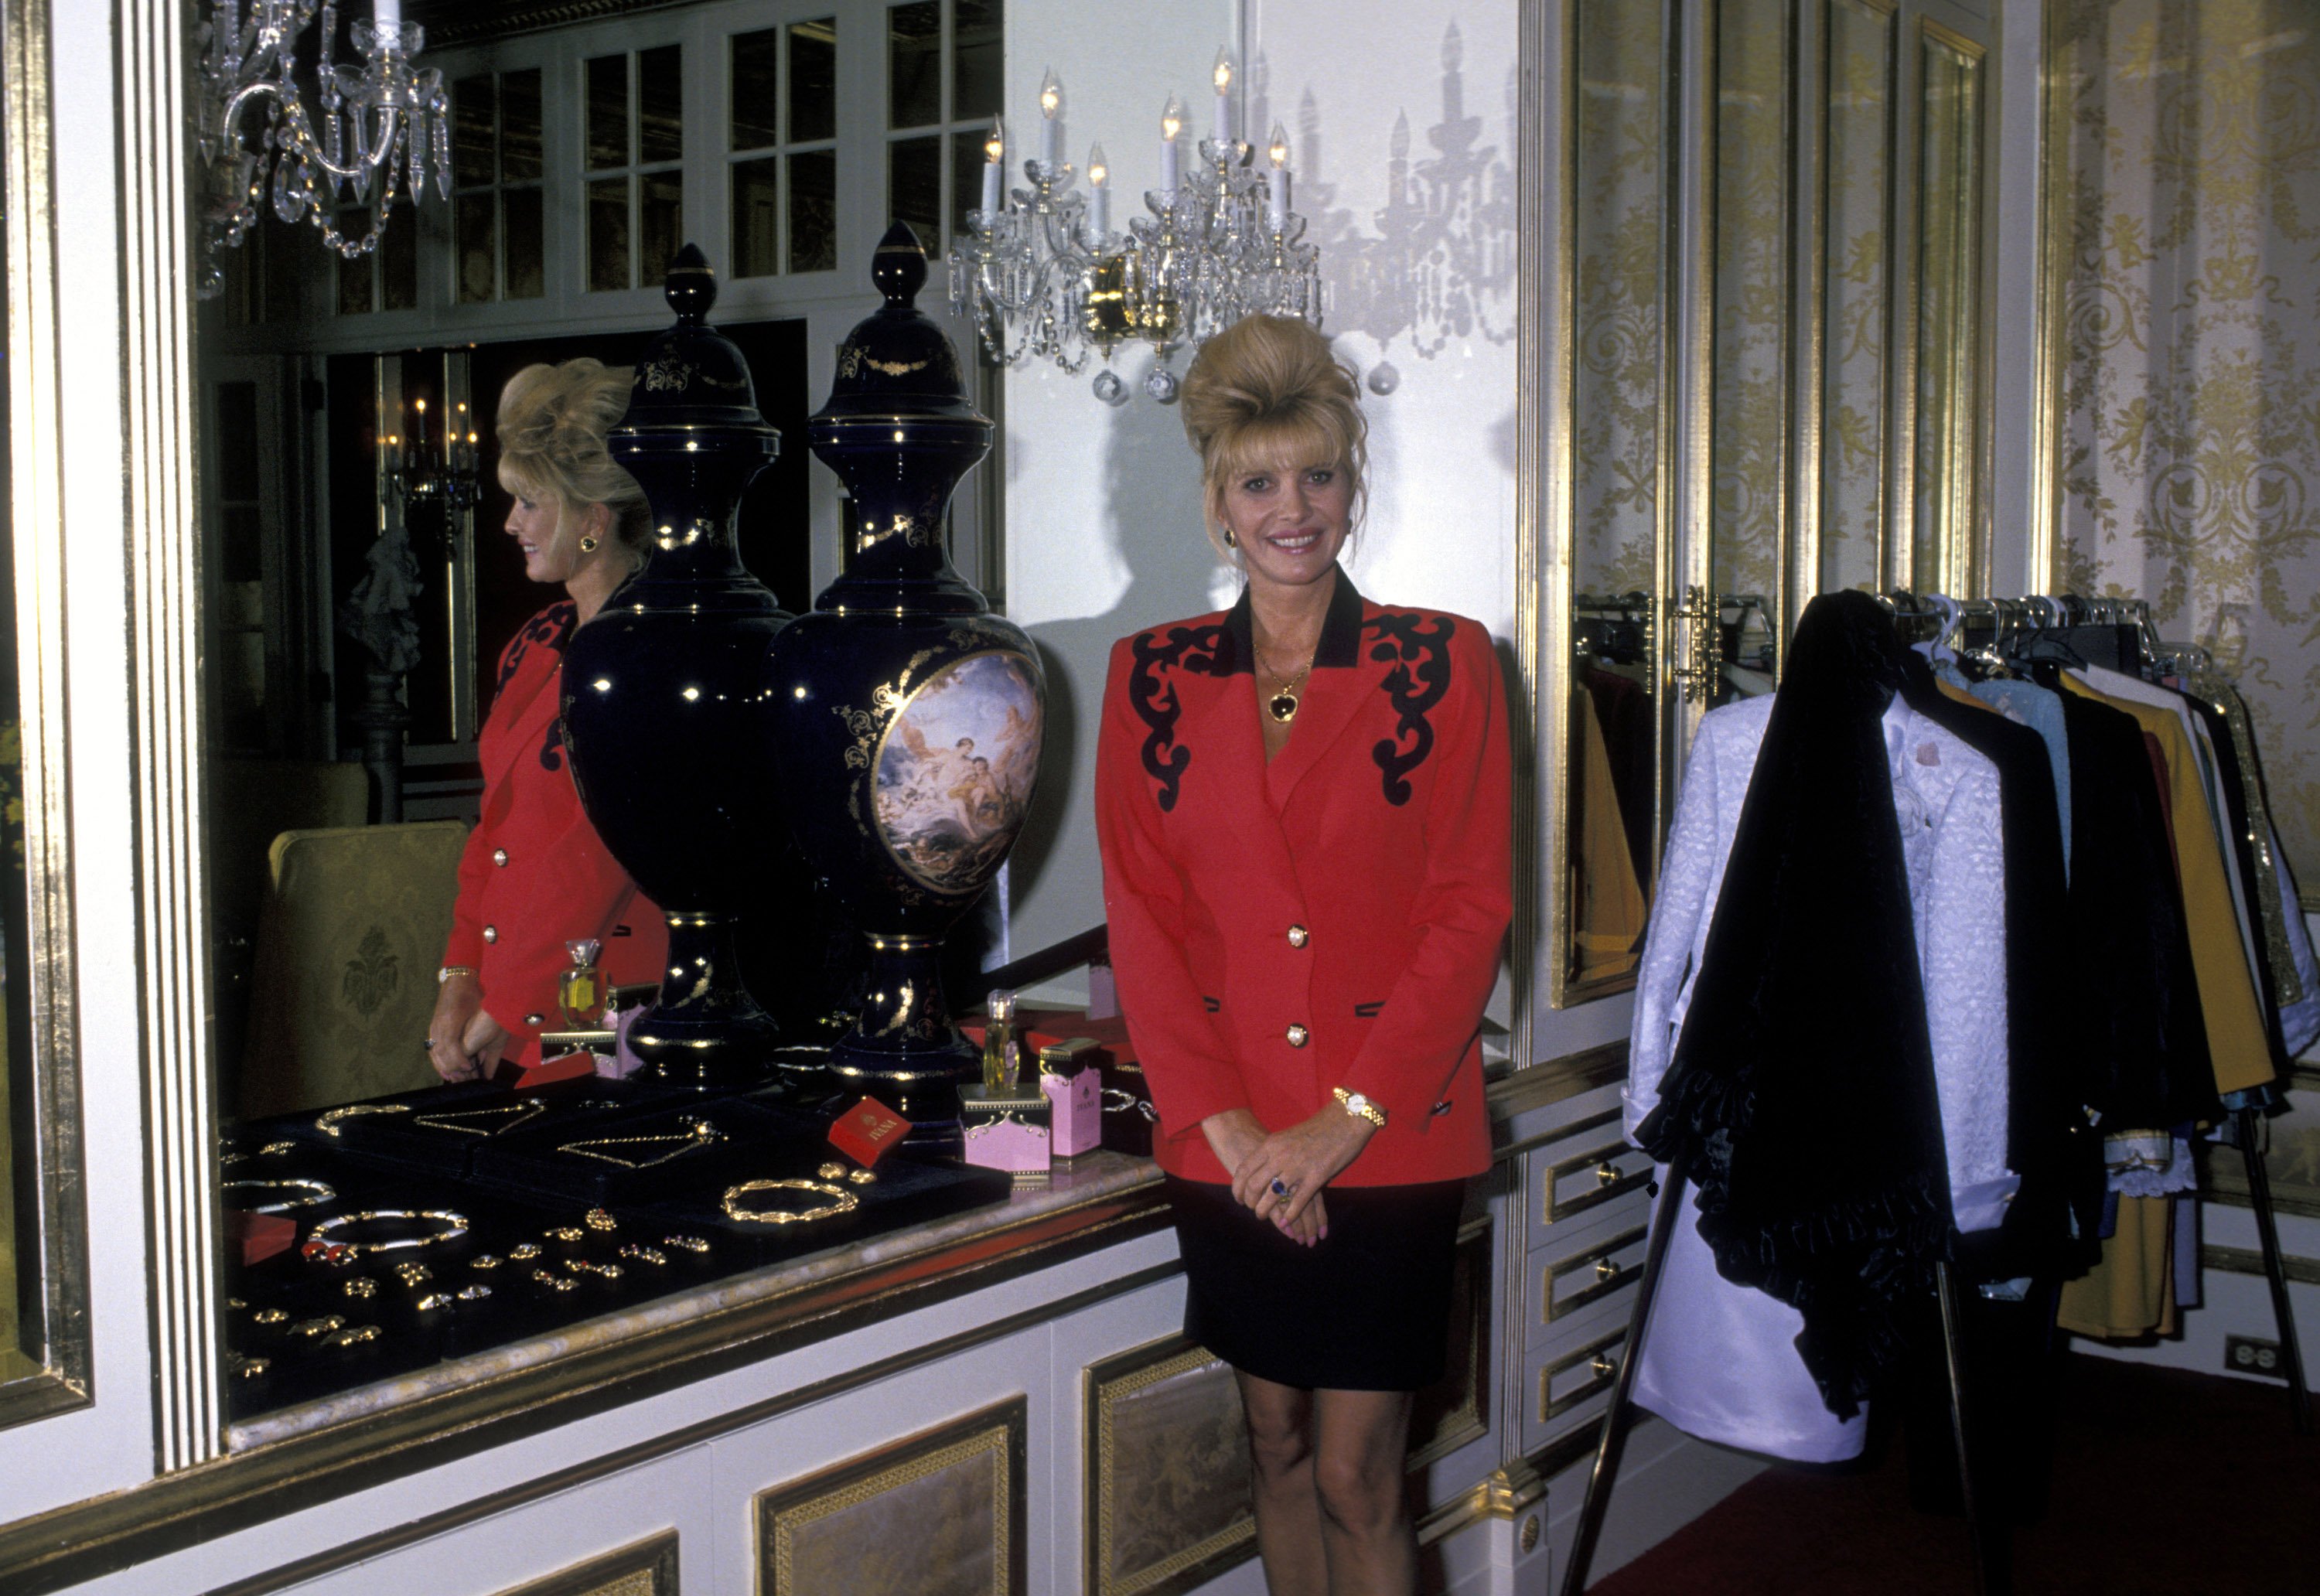 Fashion designer Ivana Trump's house during Exclusive Photo Shoot with Ivana Trump at Ivana's townhouse on September 27, 1994 in New York City, New York.┃Source: Getty Images